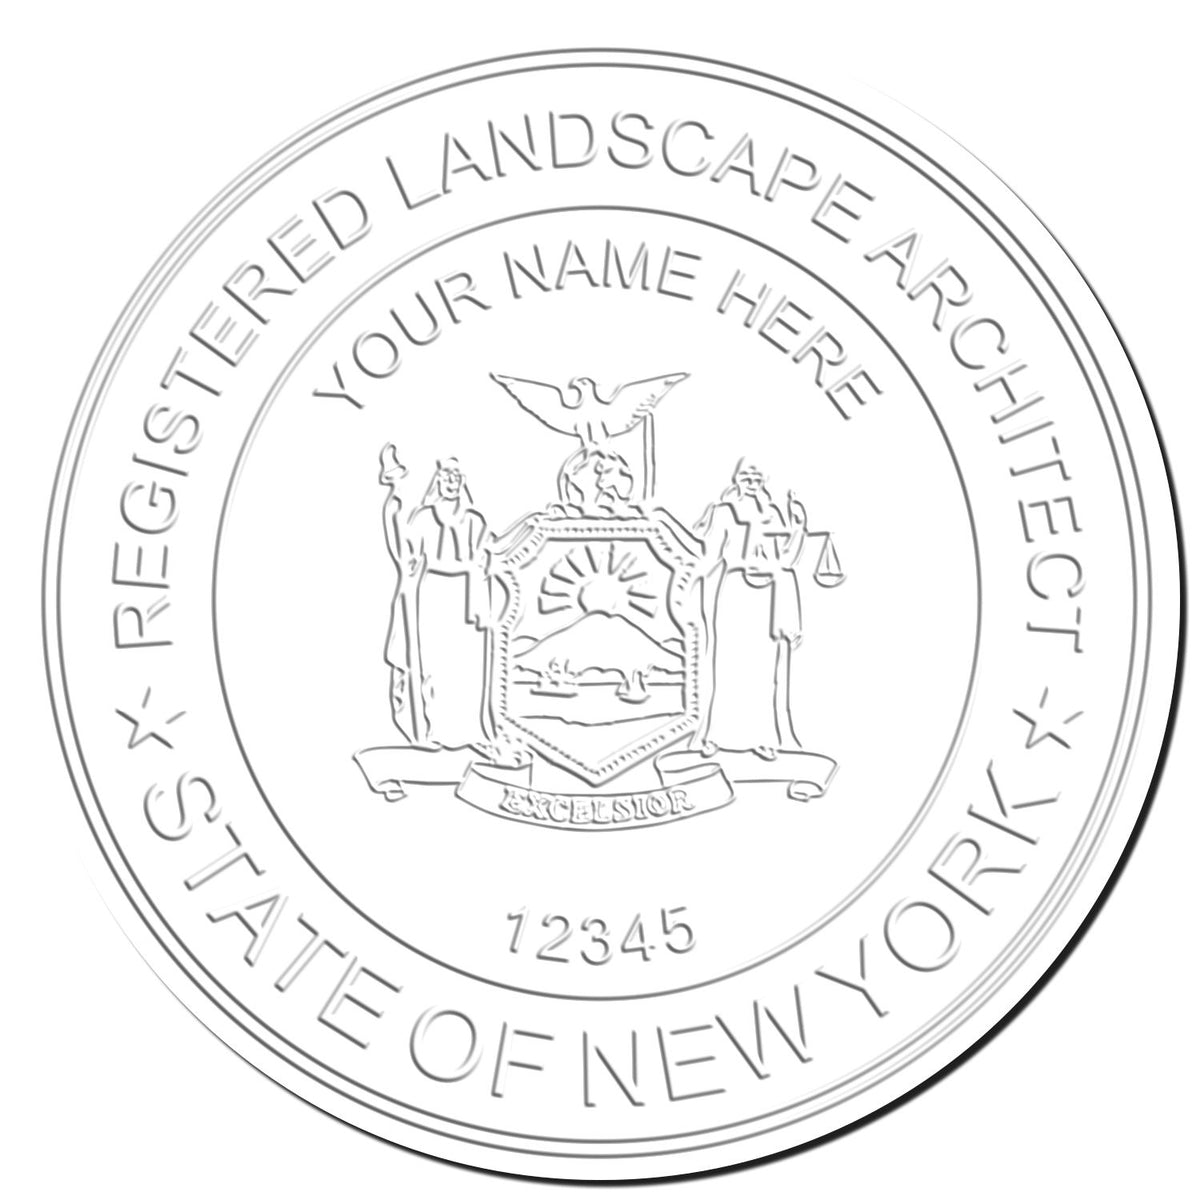 This paper is stamped with a sample imprint of the Soft Pocket New York Landscape Architect Embosser, signifying its quality and reliability.